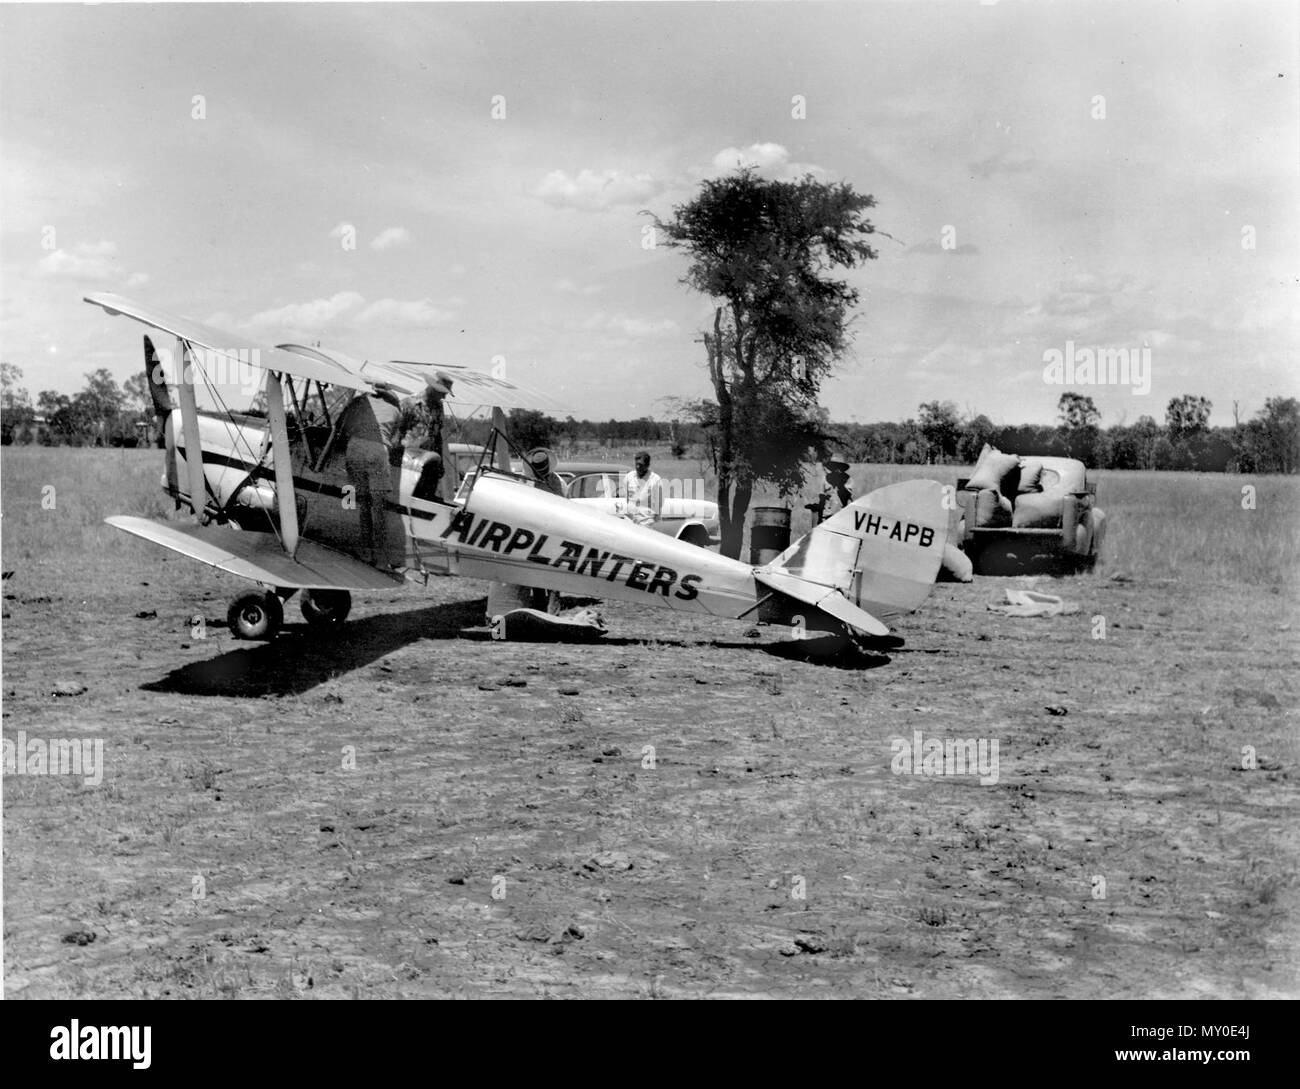 Seed plane loading at Kiddell Plains, December 1962. De Havilland Australia DH-82A Tiger Moth VH-APH was built in Mascot, NSW in September 1940 for the Royal Australian Air Force and carried RAAF serial 17-116. It served with No.7 Elementary Flying Training School in Tasmania and went into storage at the end of WW2. It was sold to a private buyer in 1946 and registered as VH-APH with Queensland Flying Services in 1957. It was sold to Airplanters of Bundaberg and operated in that region performing aerial seeding and other agricultural work until retirement in 1966. It was restored in 1989 and i Stock Photo